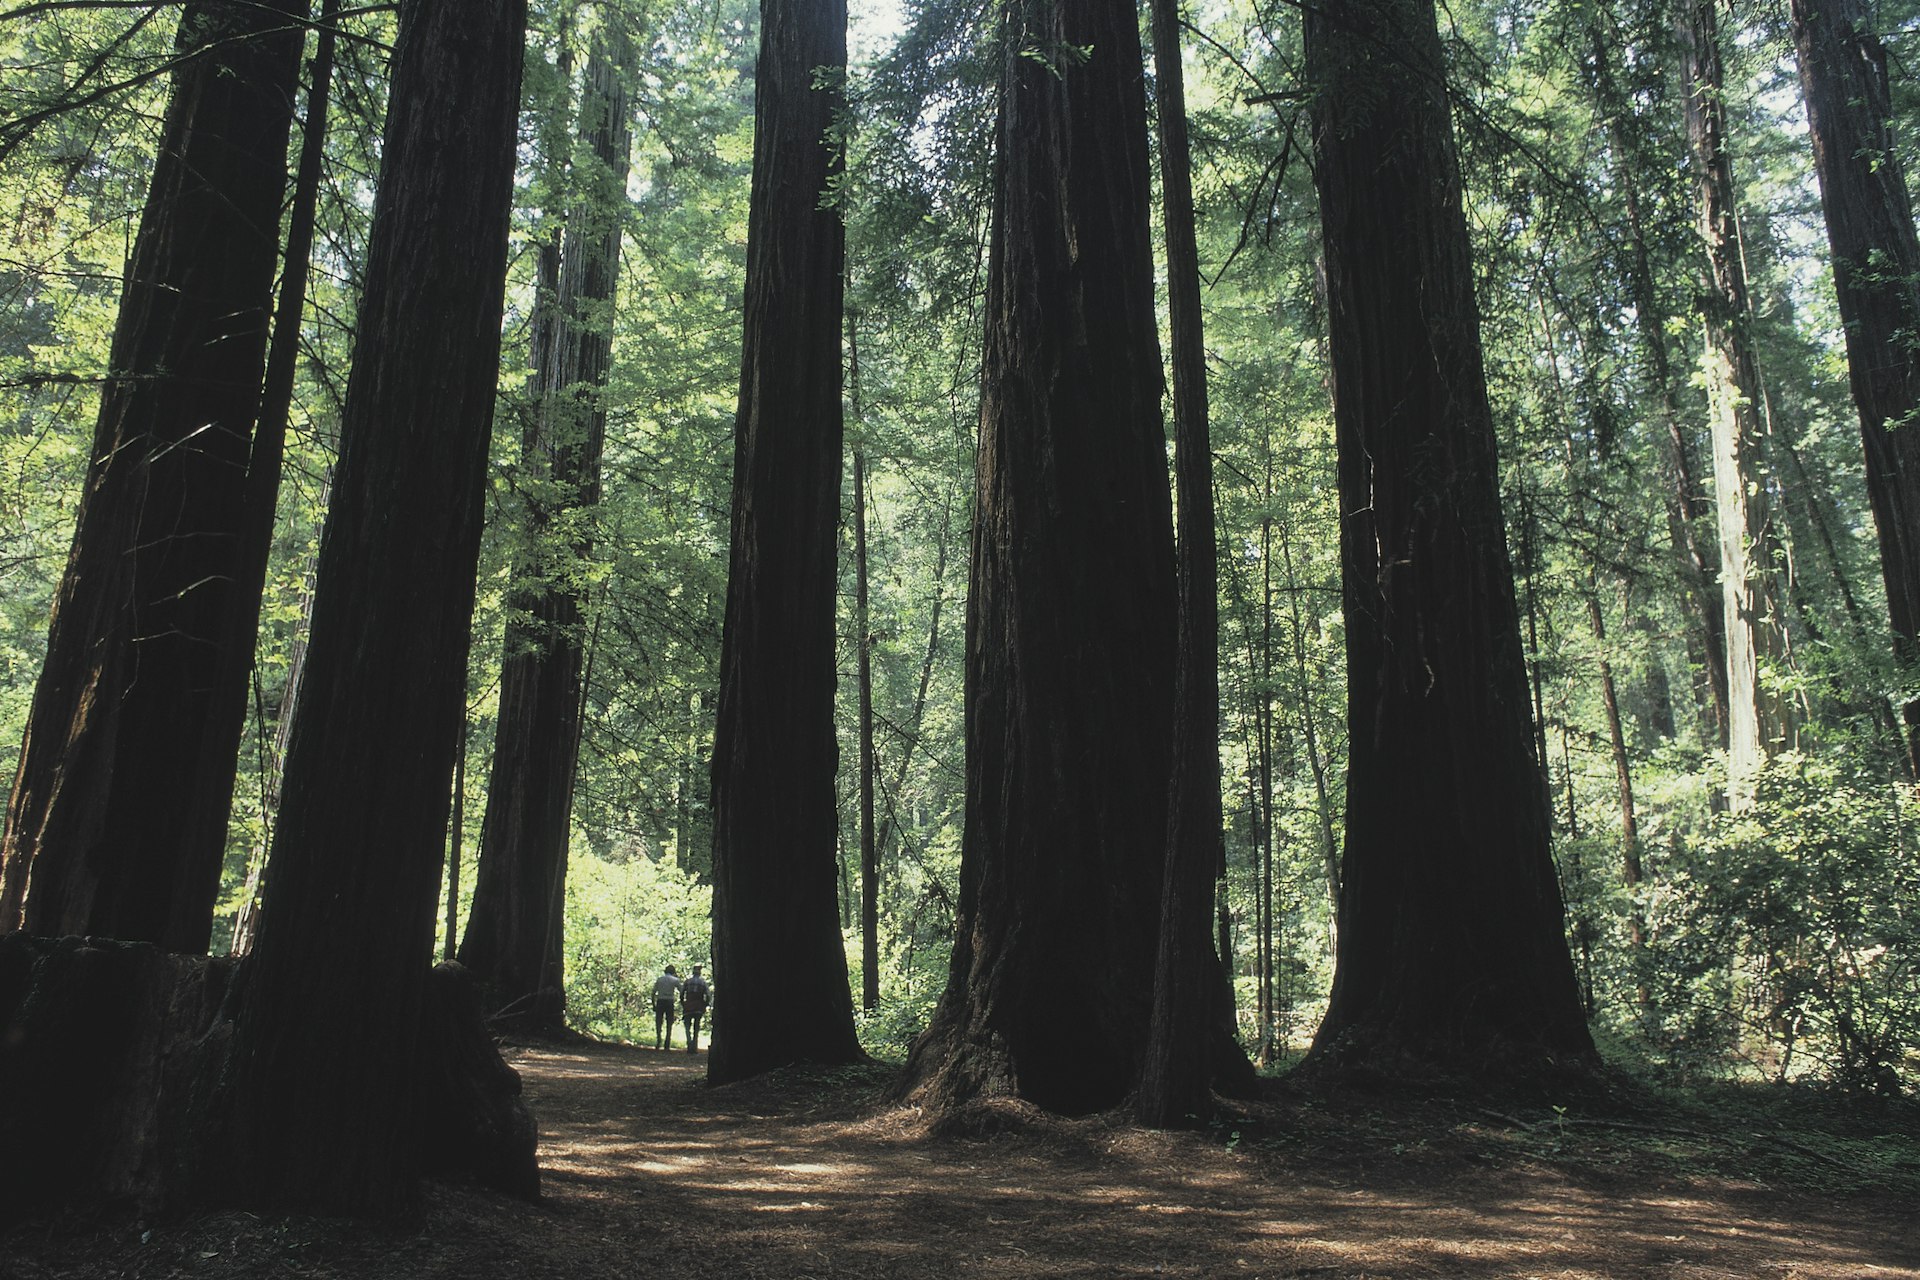 Two hikers are dwarfed by the redwood trees surrounding them in a forest 